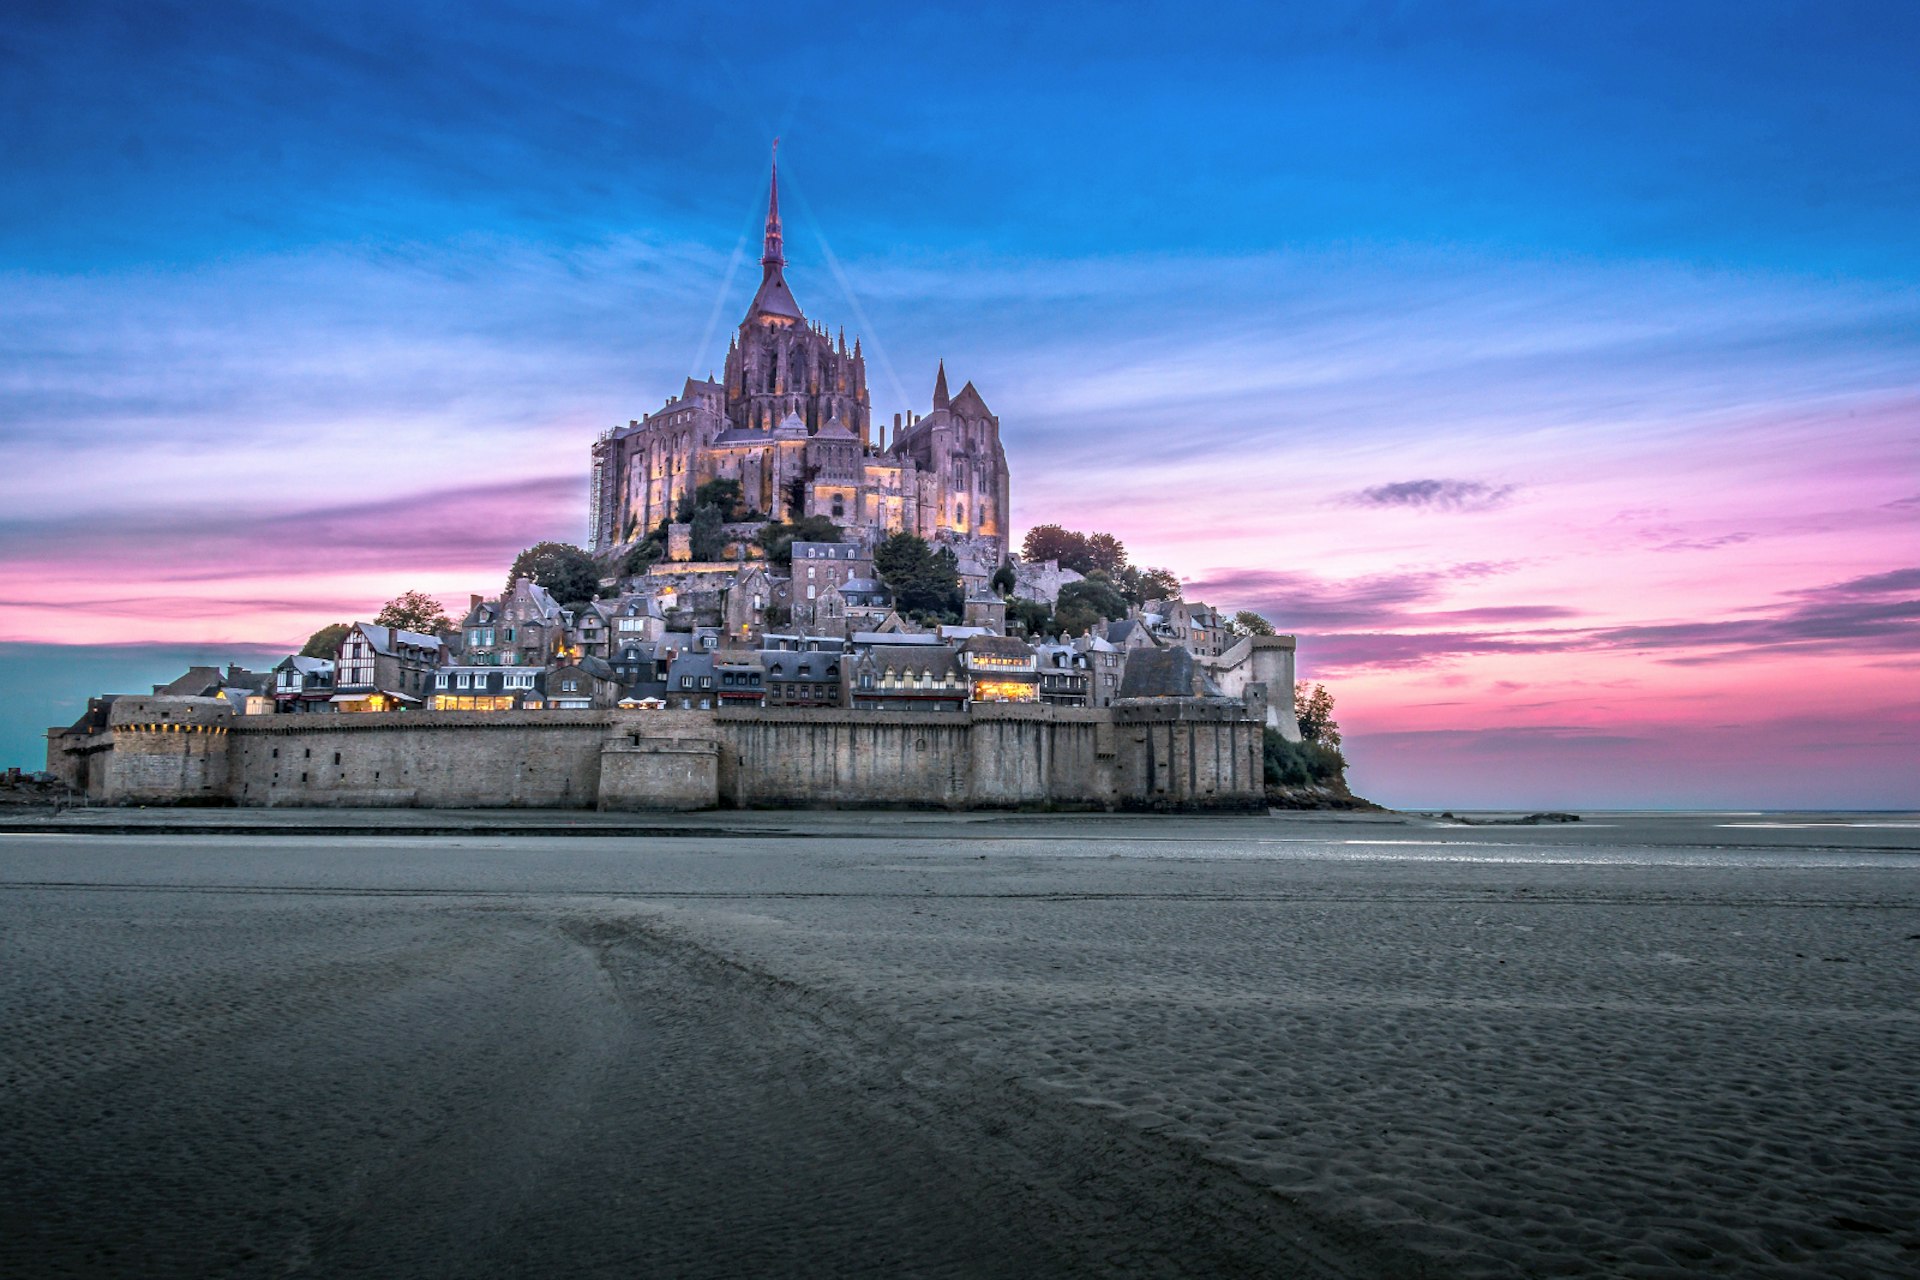 The magical abbey of Mont St-Michel against a very dramatic colourful sunset. The abbey sits across a plain of smooth white sand